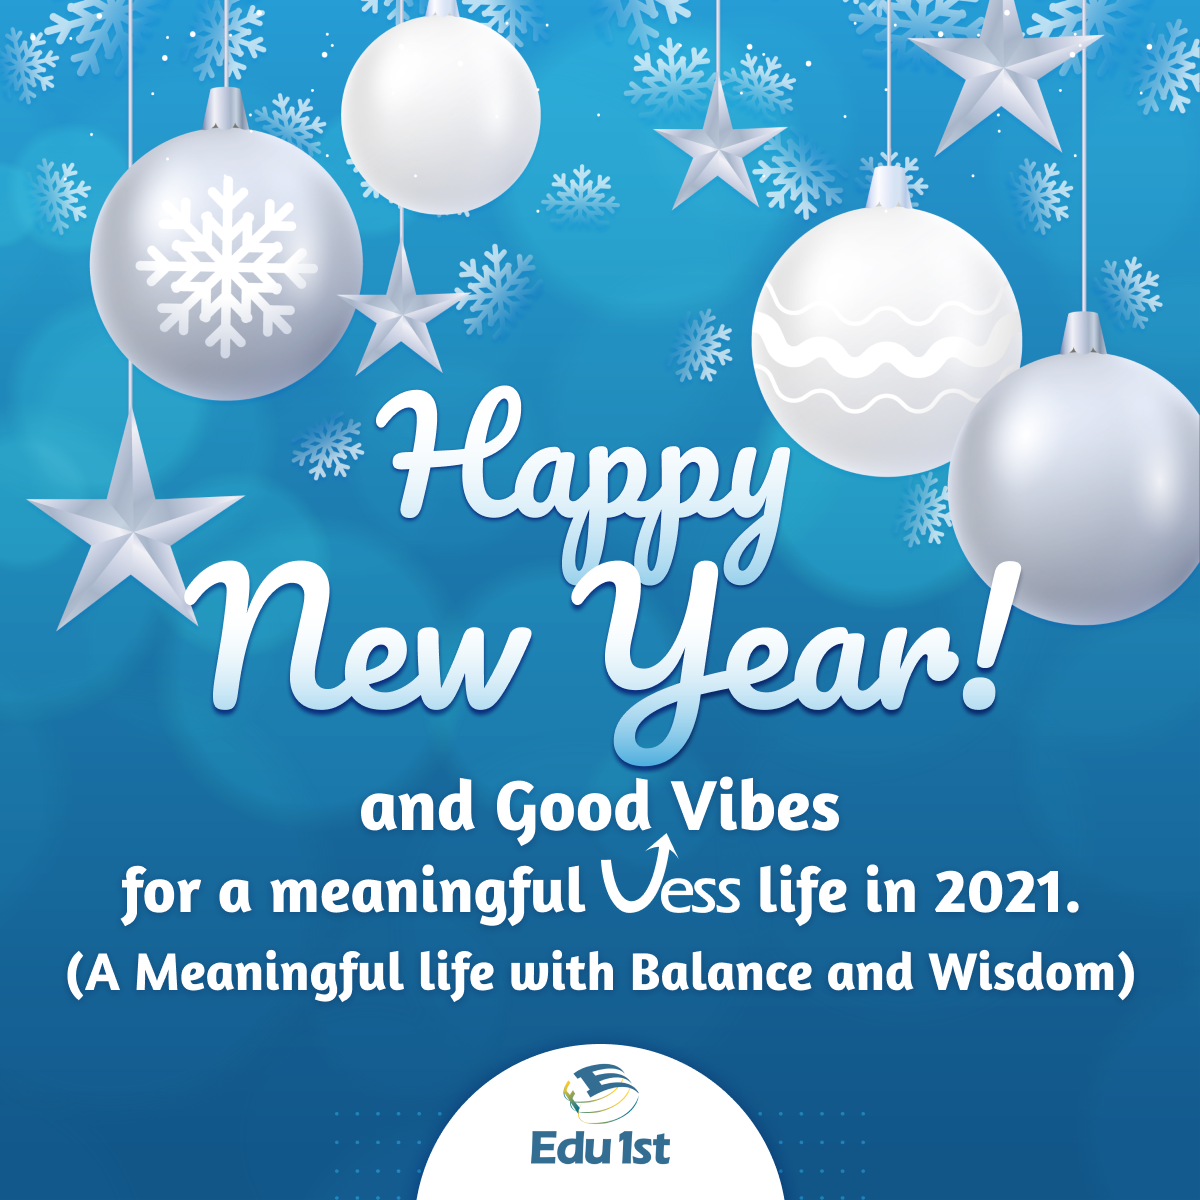 We are grateful to have families like you, who are a pleasure to deal with, and we wish you a New Year as cheerful and happy as you and your children are.